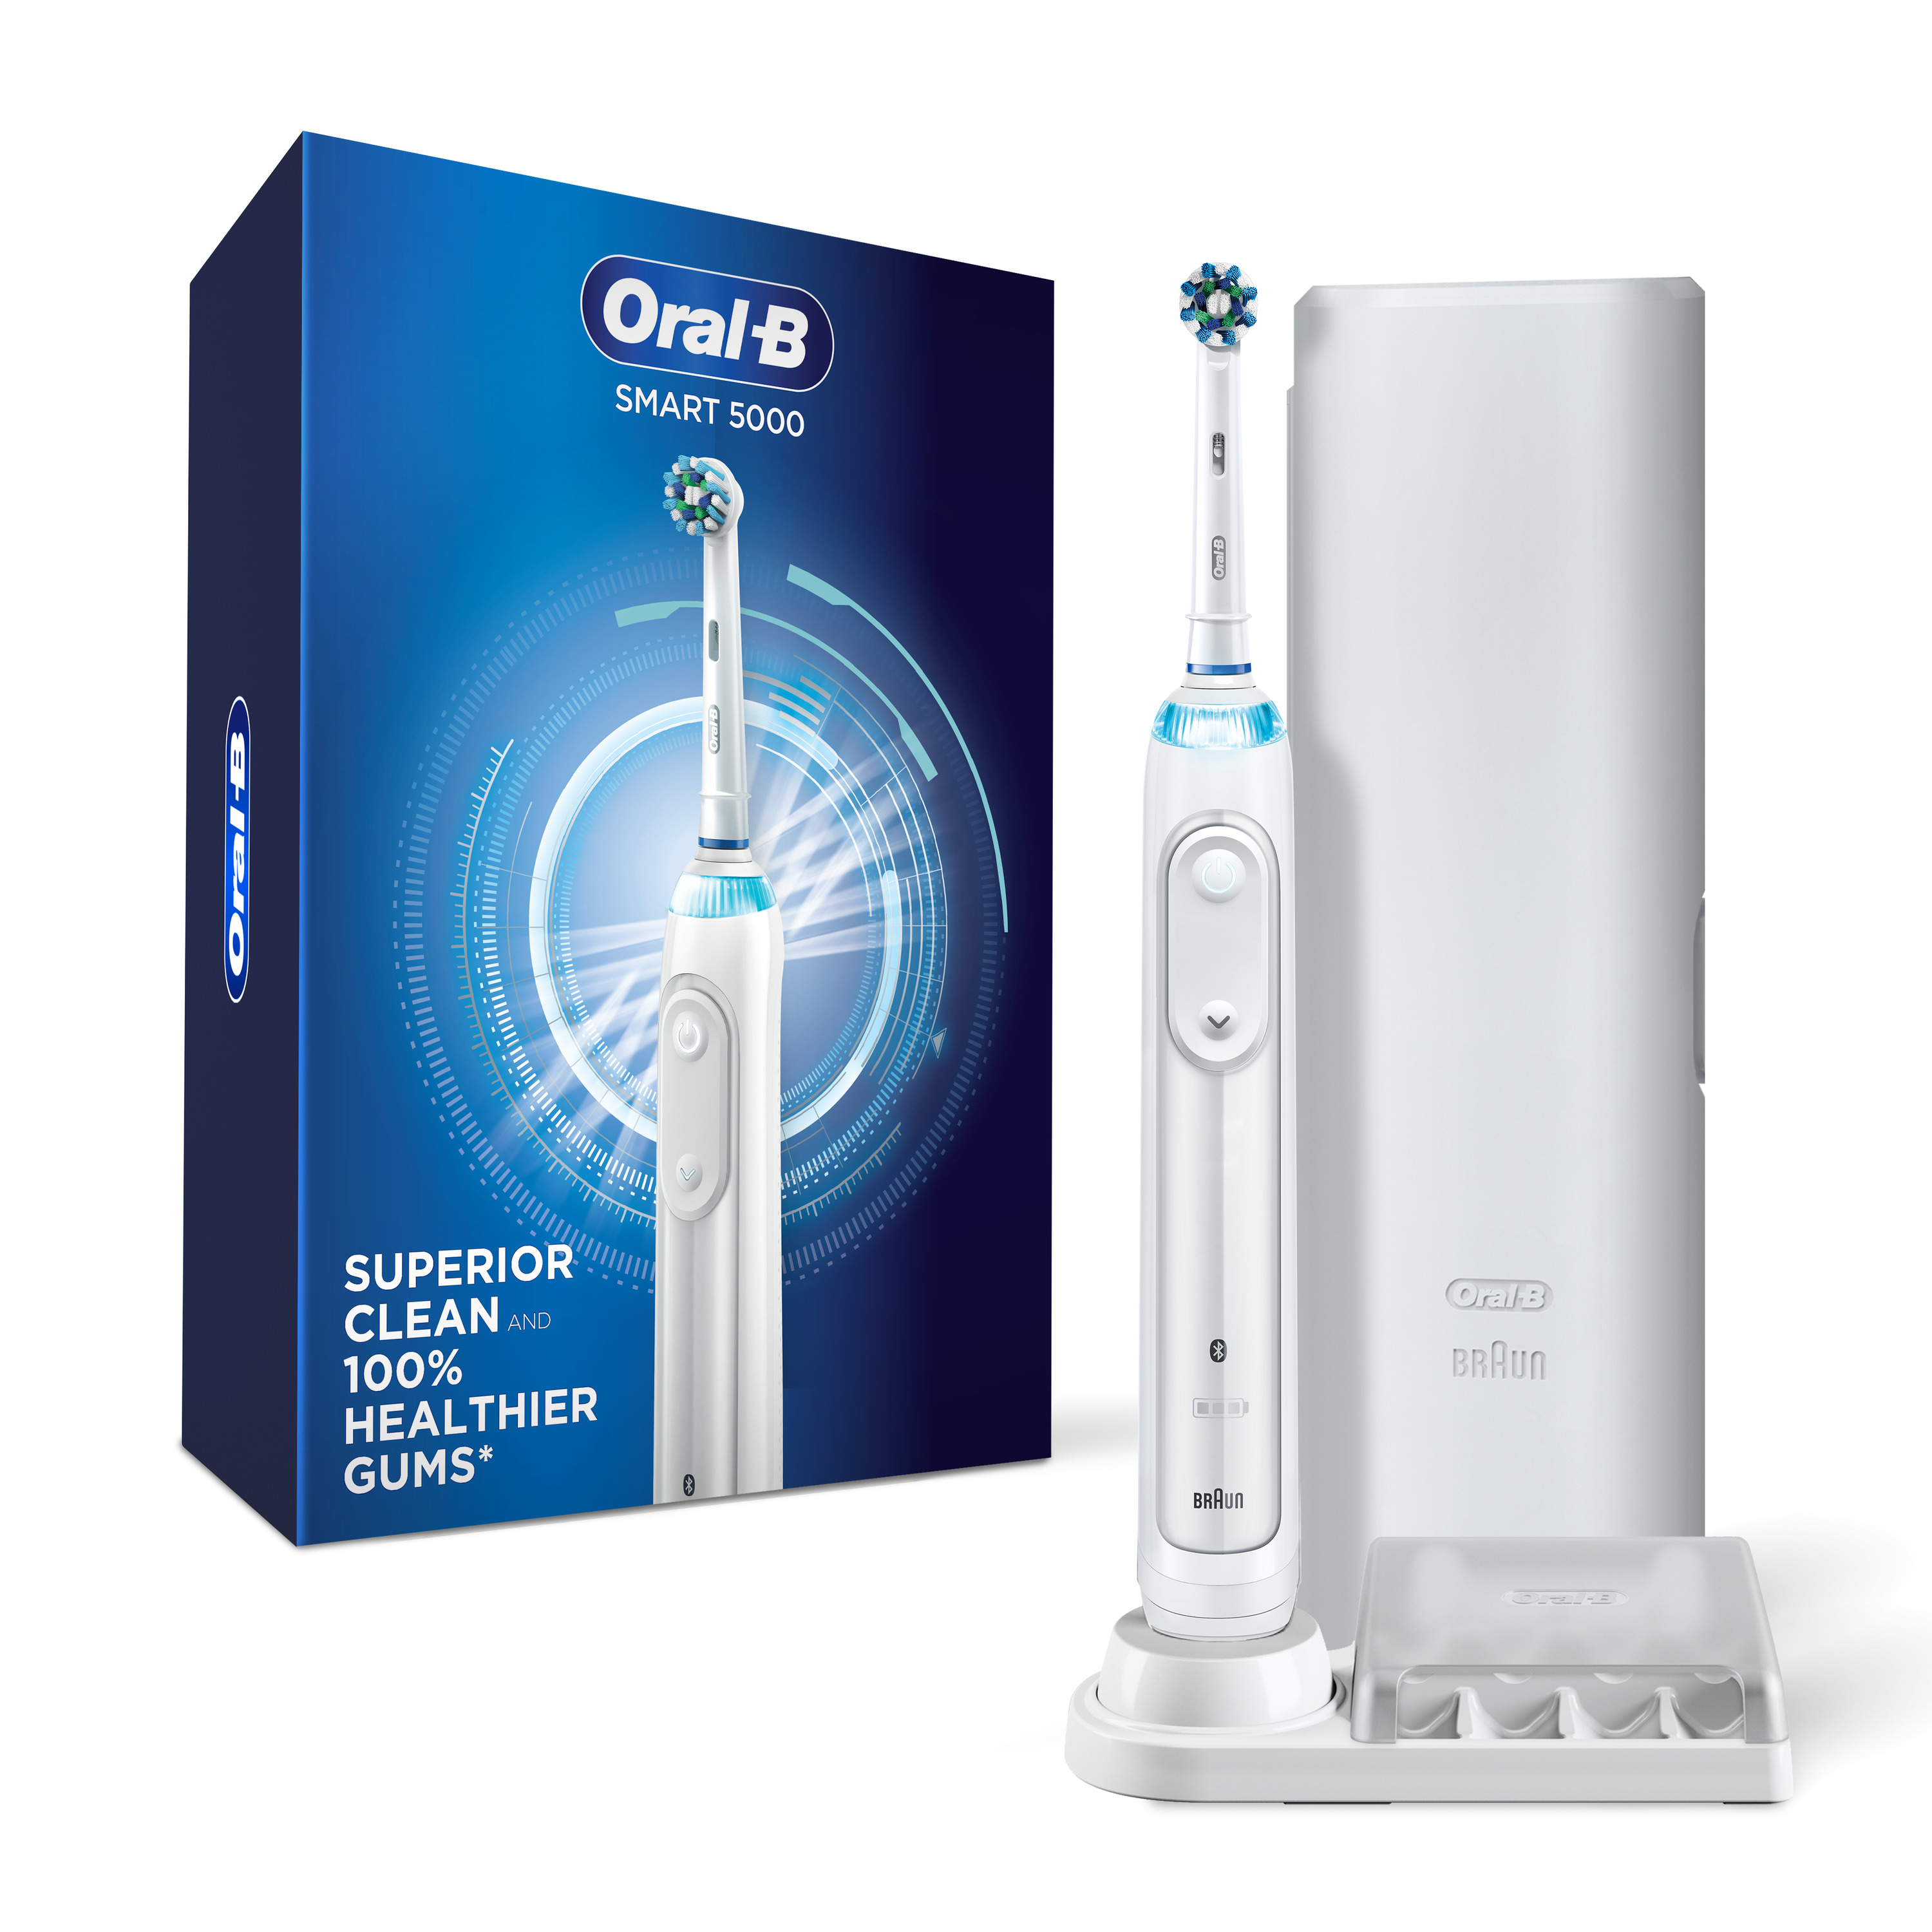 Oral-B 5000 SmartSeries Electric Compact Head Toothbrush, Rechargeable, White, Adults & Children 3+ - image 1 of 22